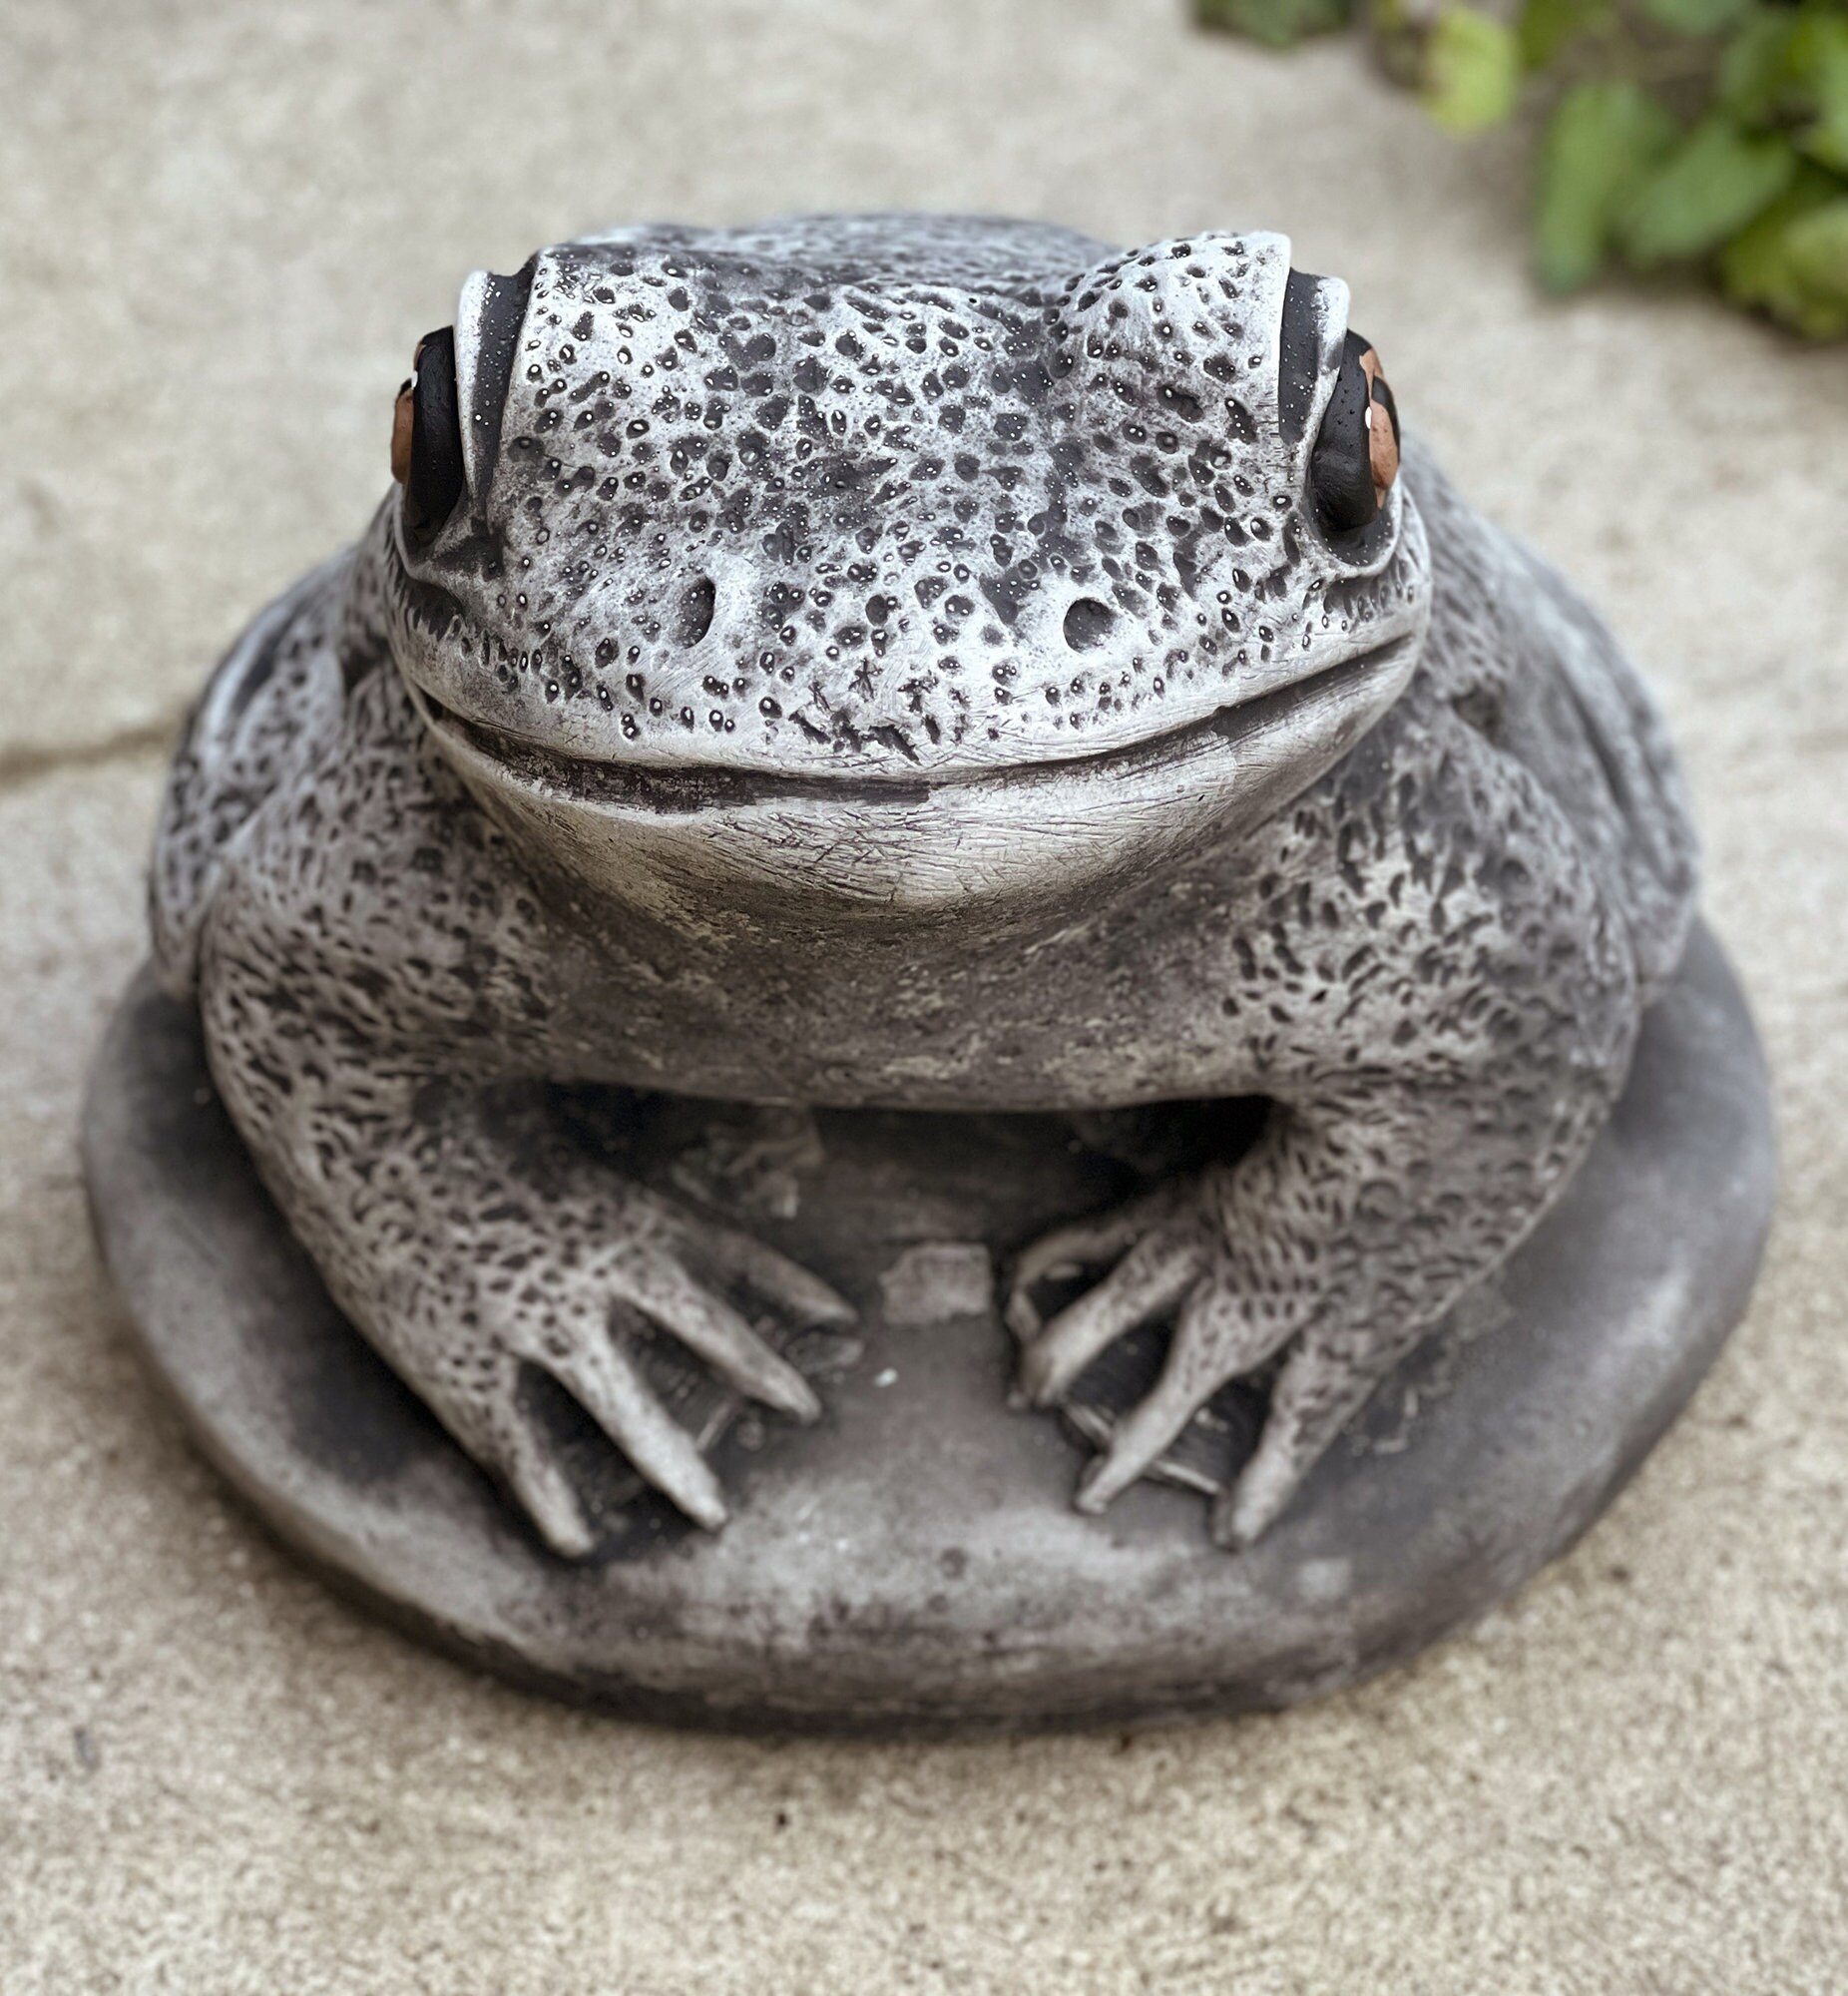 Concrete Frog Miniature Garden Decoration Stone Frog Statue Outdoor or  Indoor Ornament Animal Figurine Cement Toad Sculpture Frog Lover Gift 